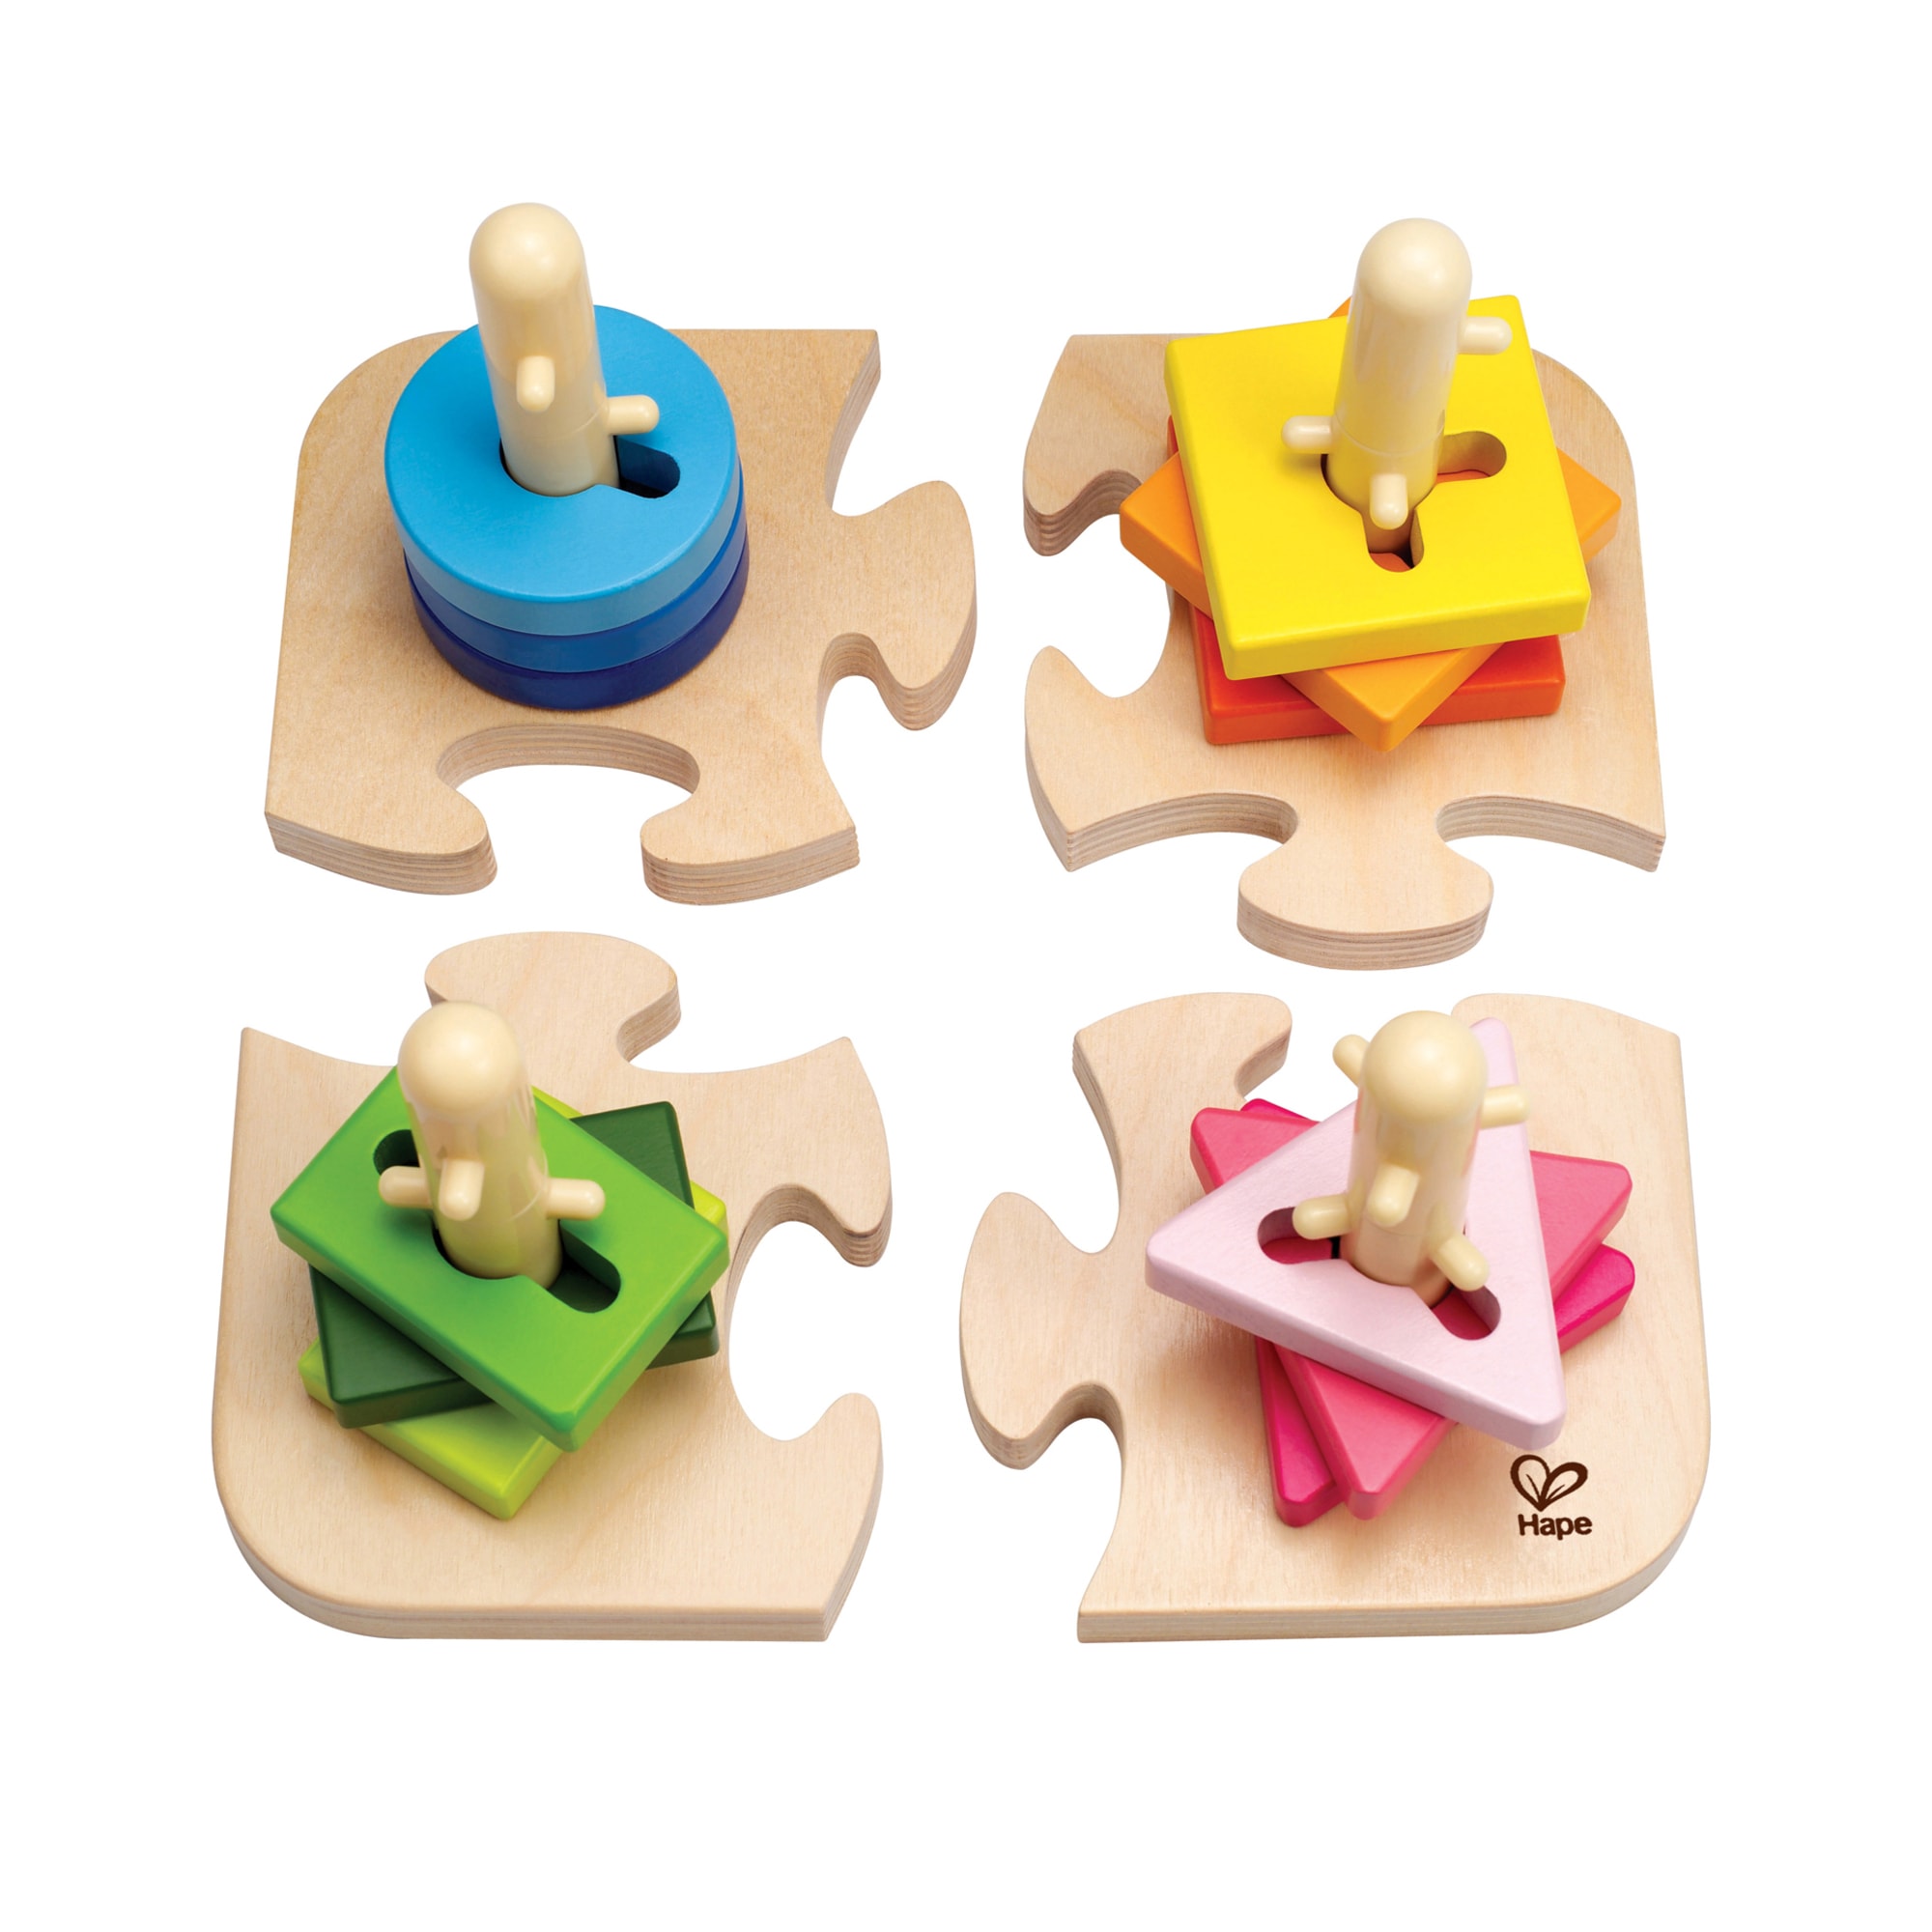 Hape Creative Peg Puzzle - 16 Pieces, Wooden Toddler Stacking Shape Puzzle Toy - image 1 of 6